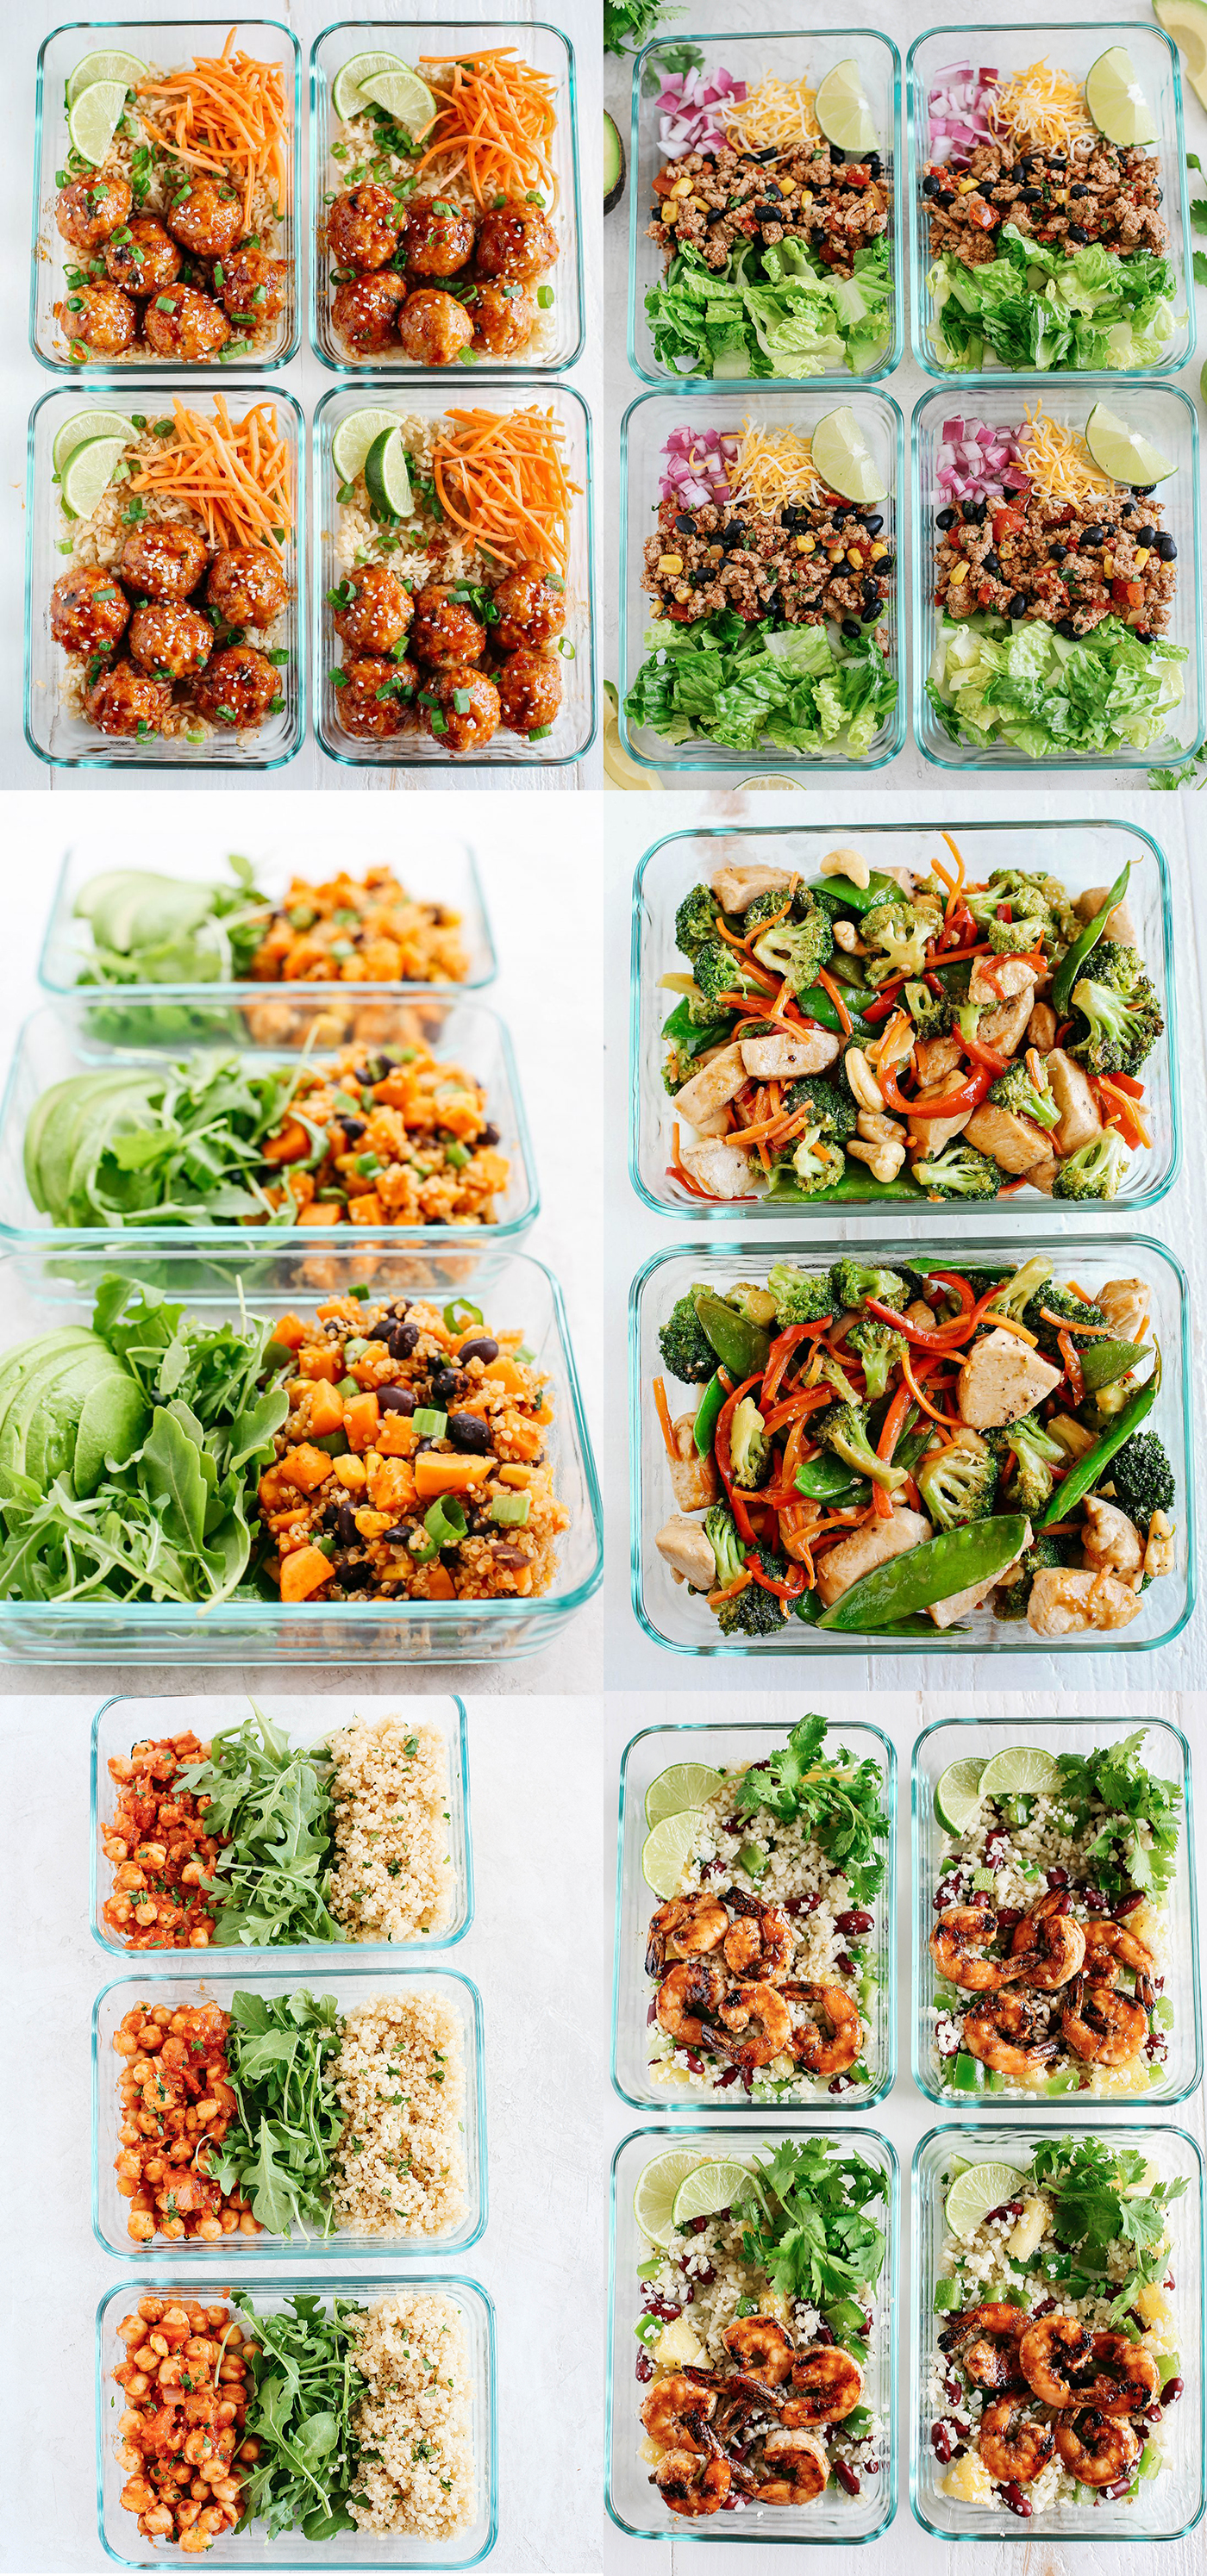 Quick and easy meal prep recipes that you can make ahead for the week that are healthy, delicious and all under 30 minutes!